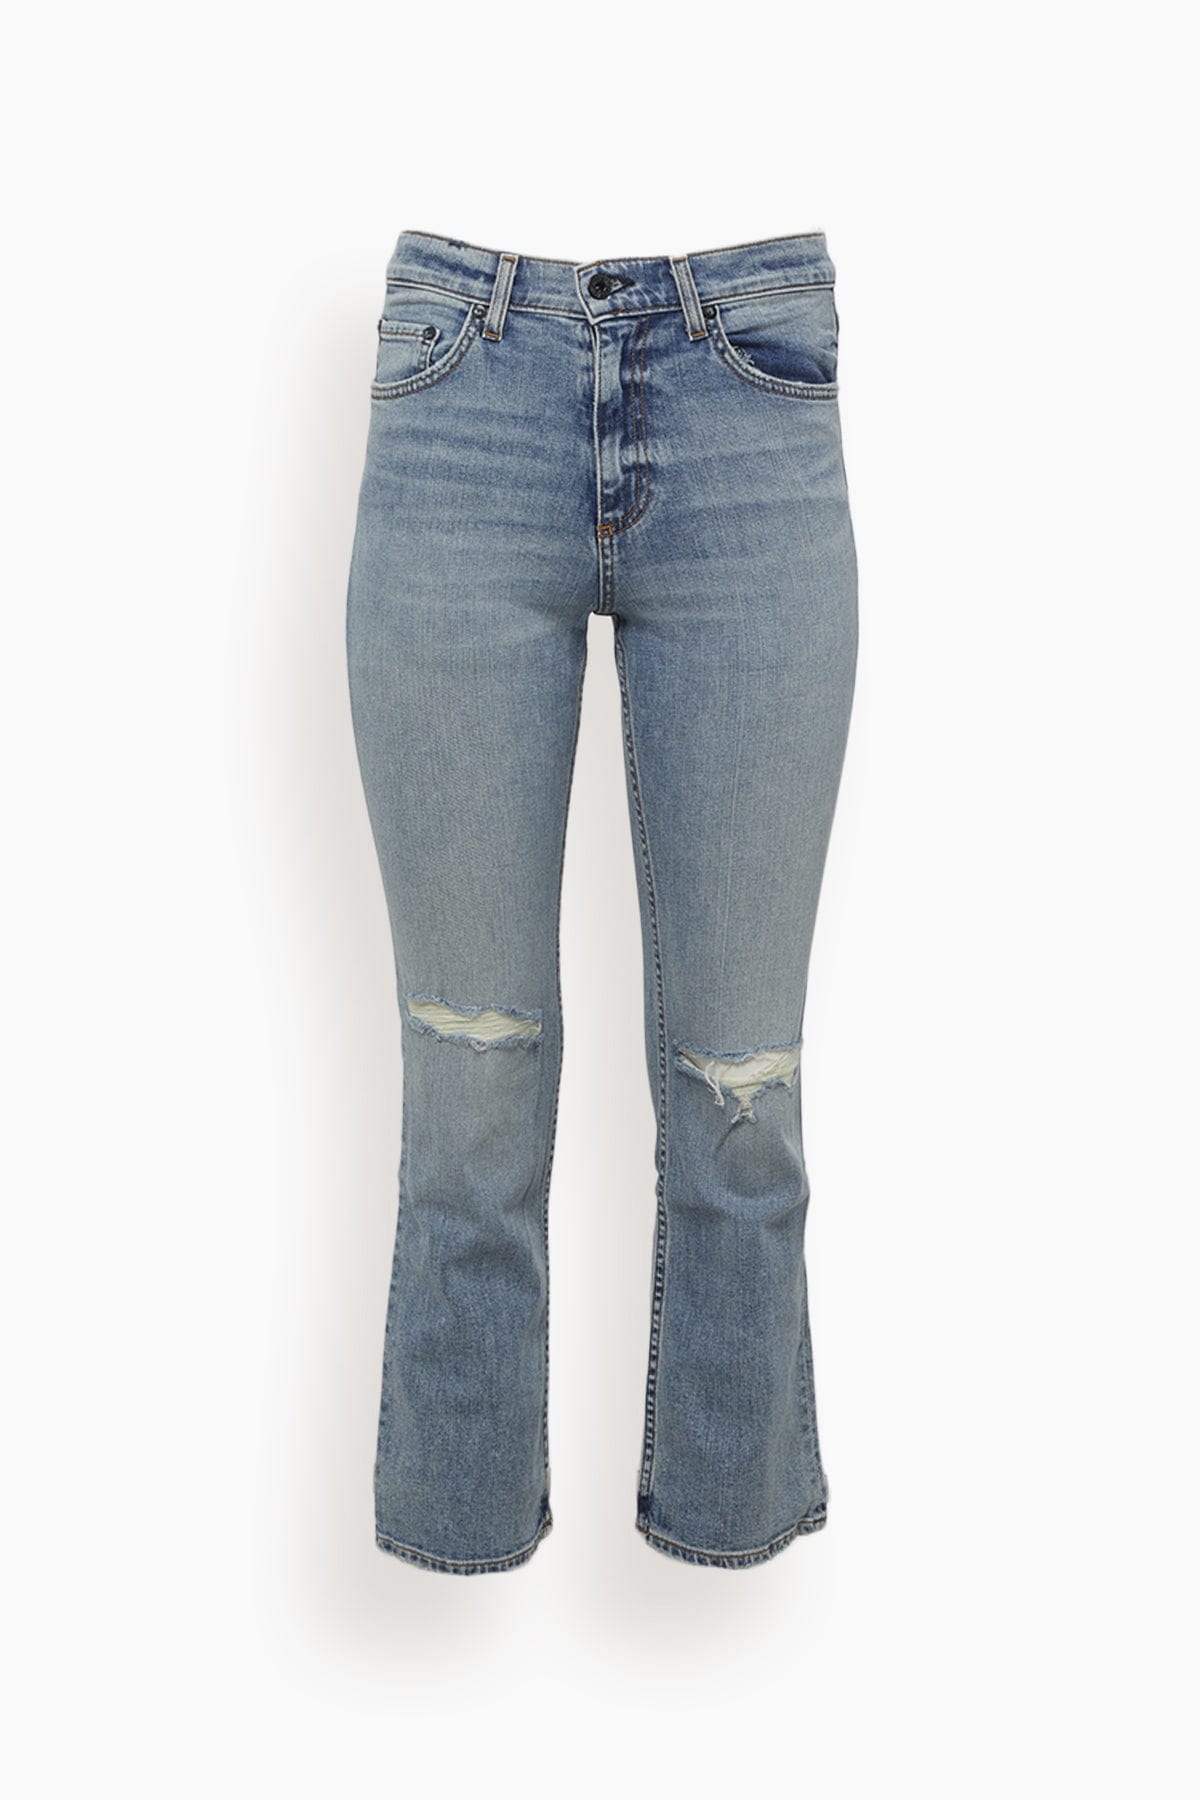 Askk NY Jeans High Rise Crop Boot Jean in Montauk